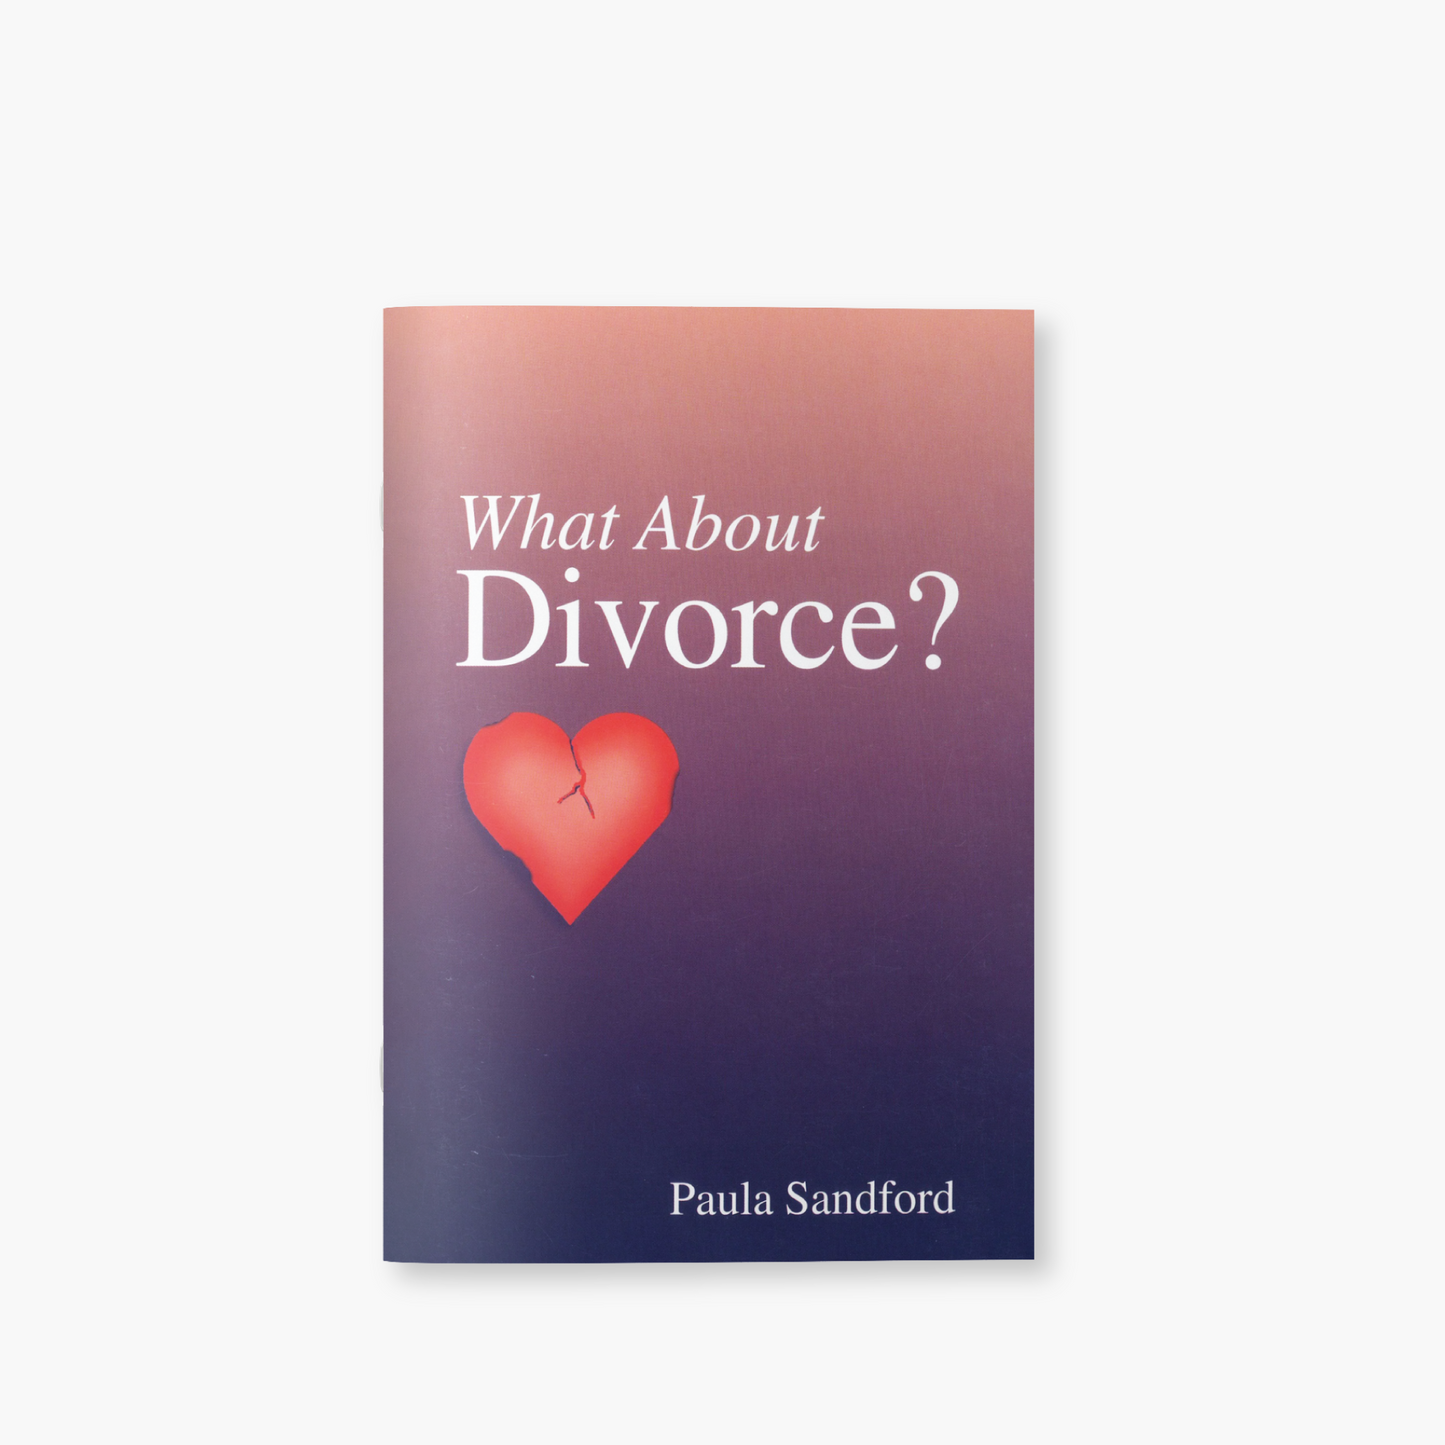 What About Divorce?